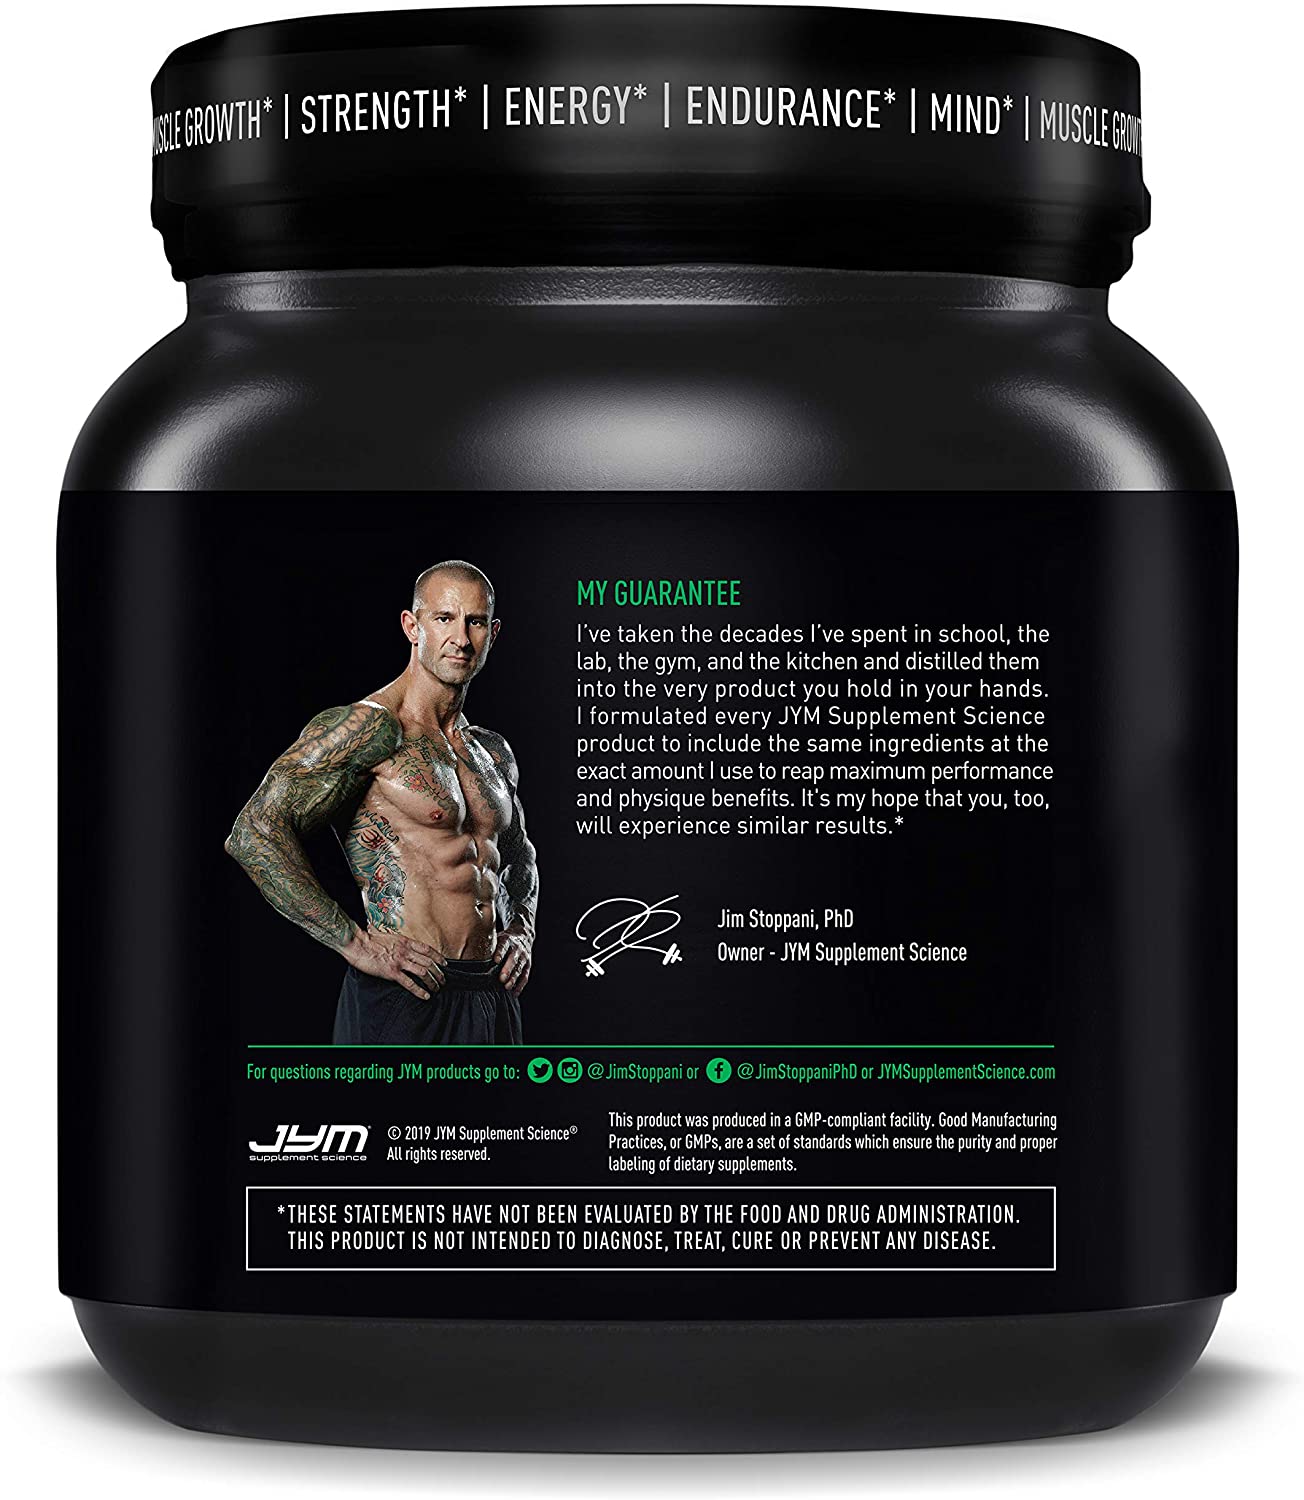 15 Minute Is jym pre workout good for Push Pull Legs